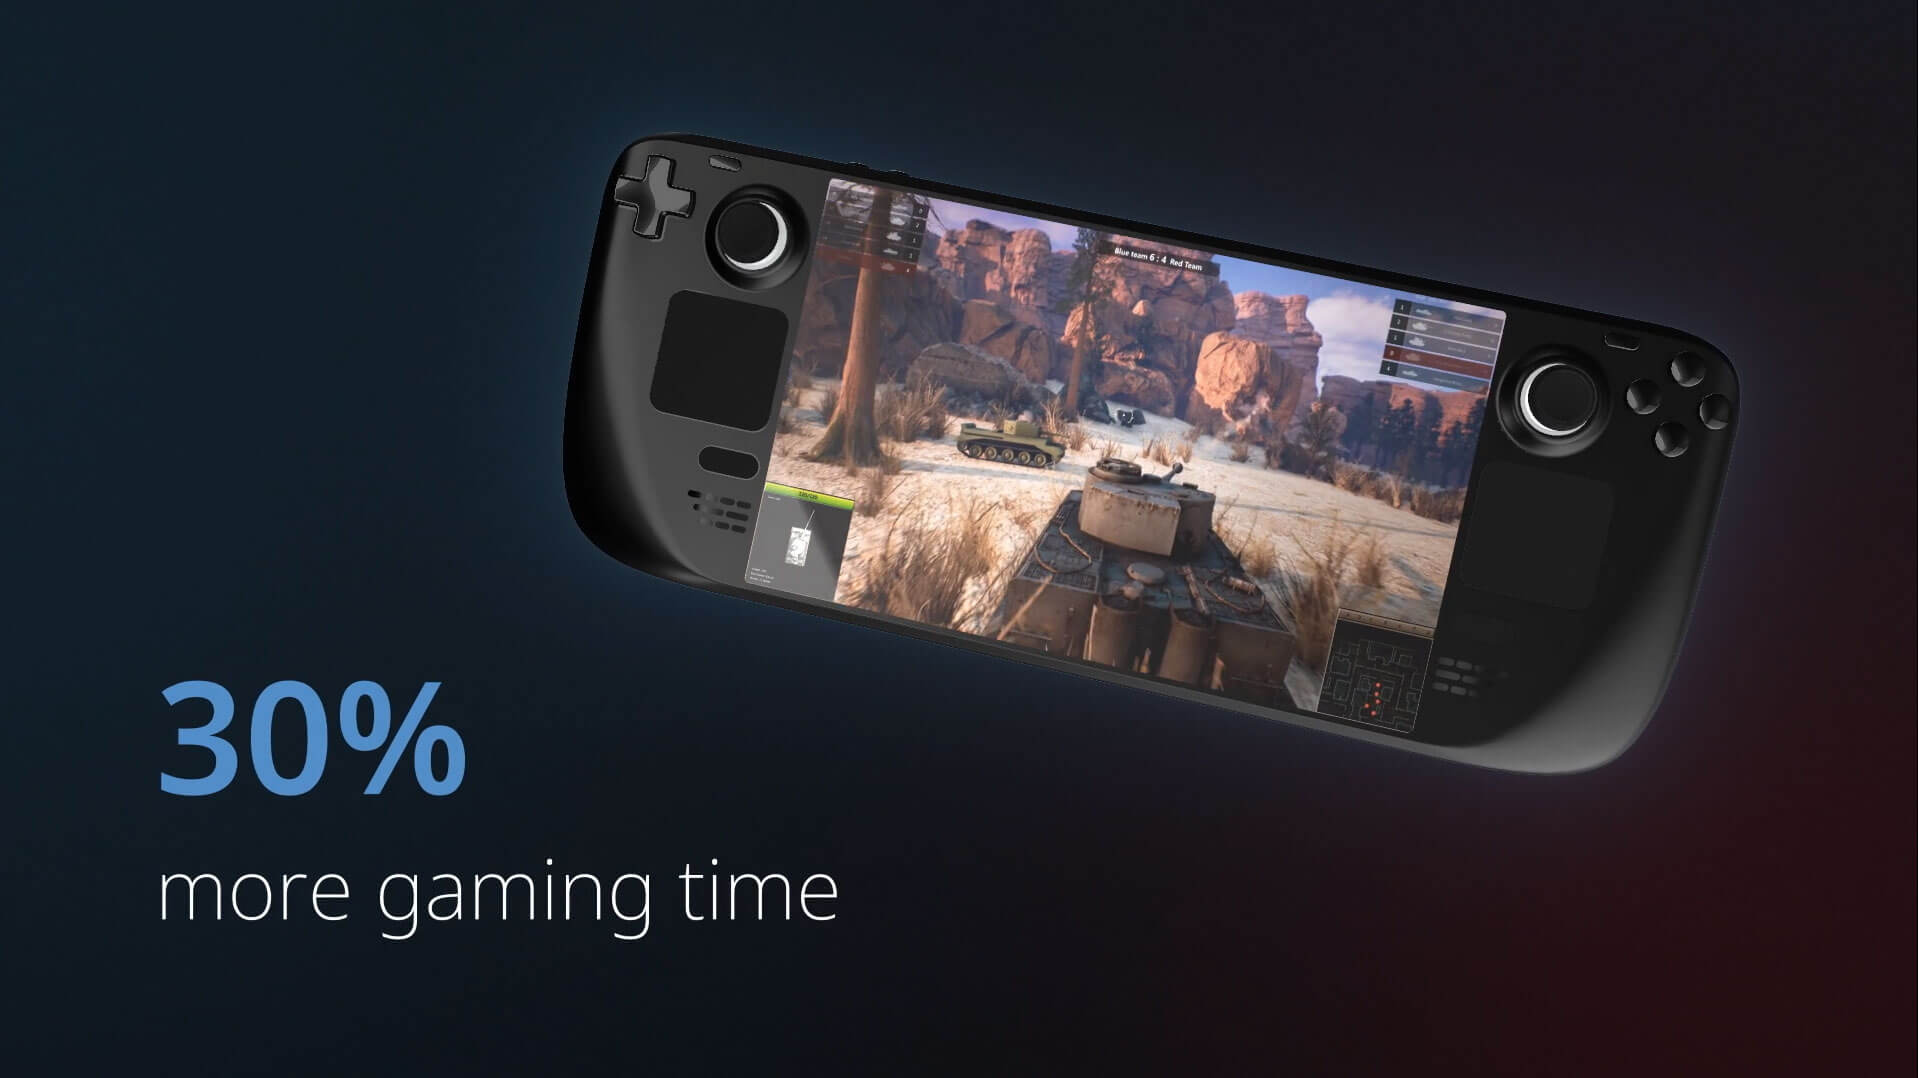 AirJet Mini achieves 30% more gaming time by providing more space for a larger battery, without making the device bigger, hotter, or noisy.